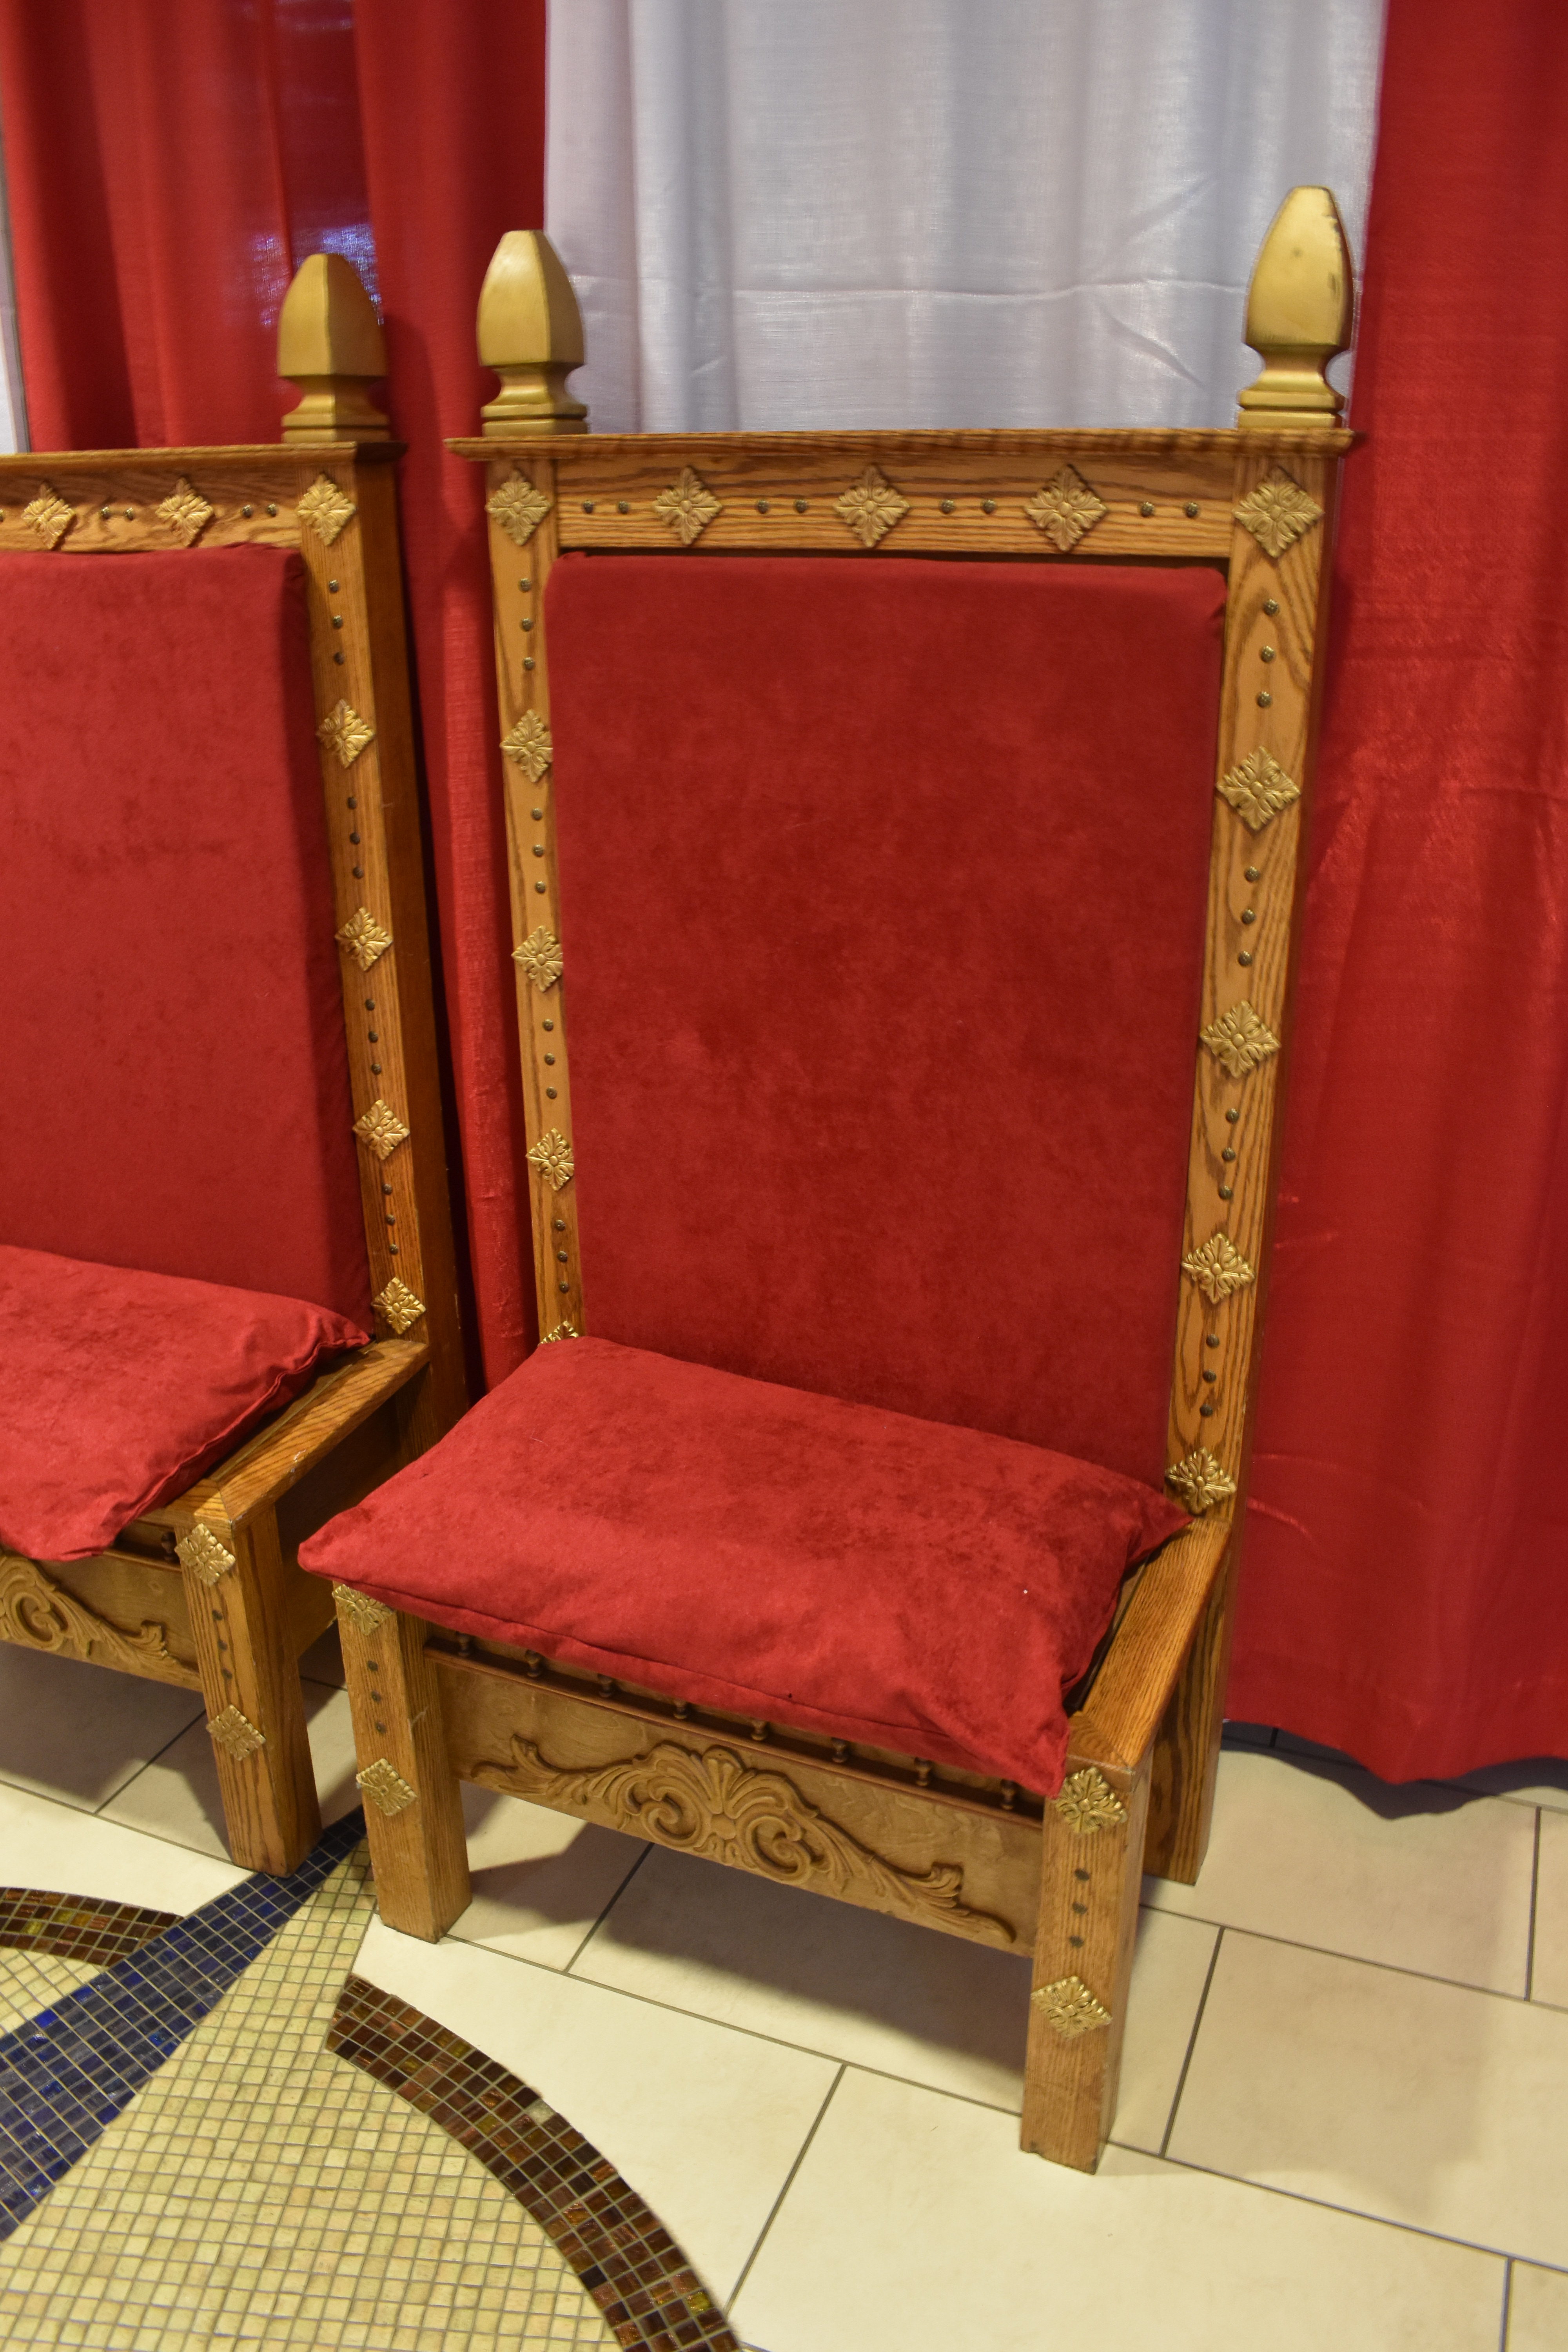 https://magicspecialevents.com/event-rentals/wp-content/uploads/Trinity-Episcopal-School-Prom-Throne-Chair-Red-3.jpg